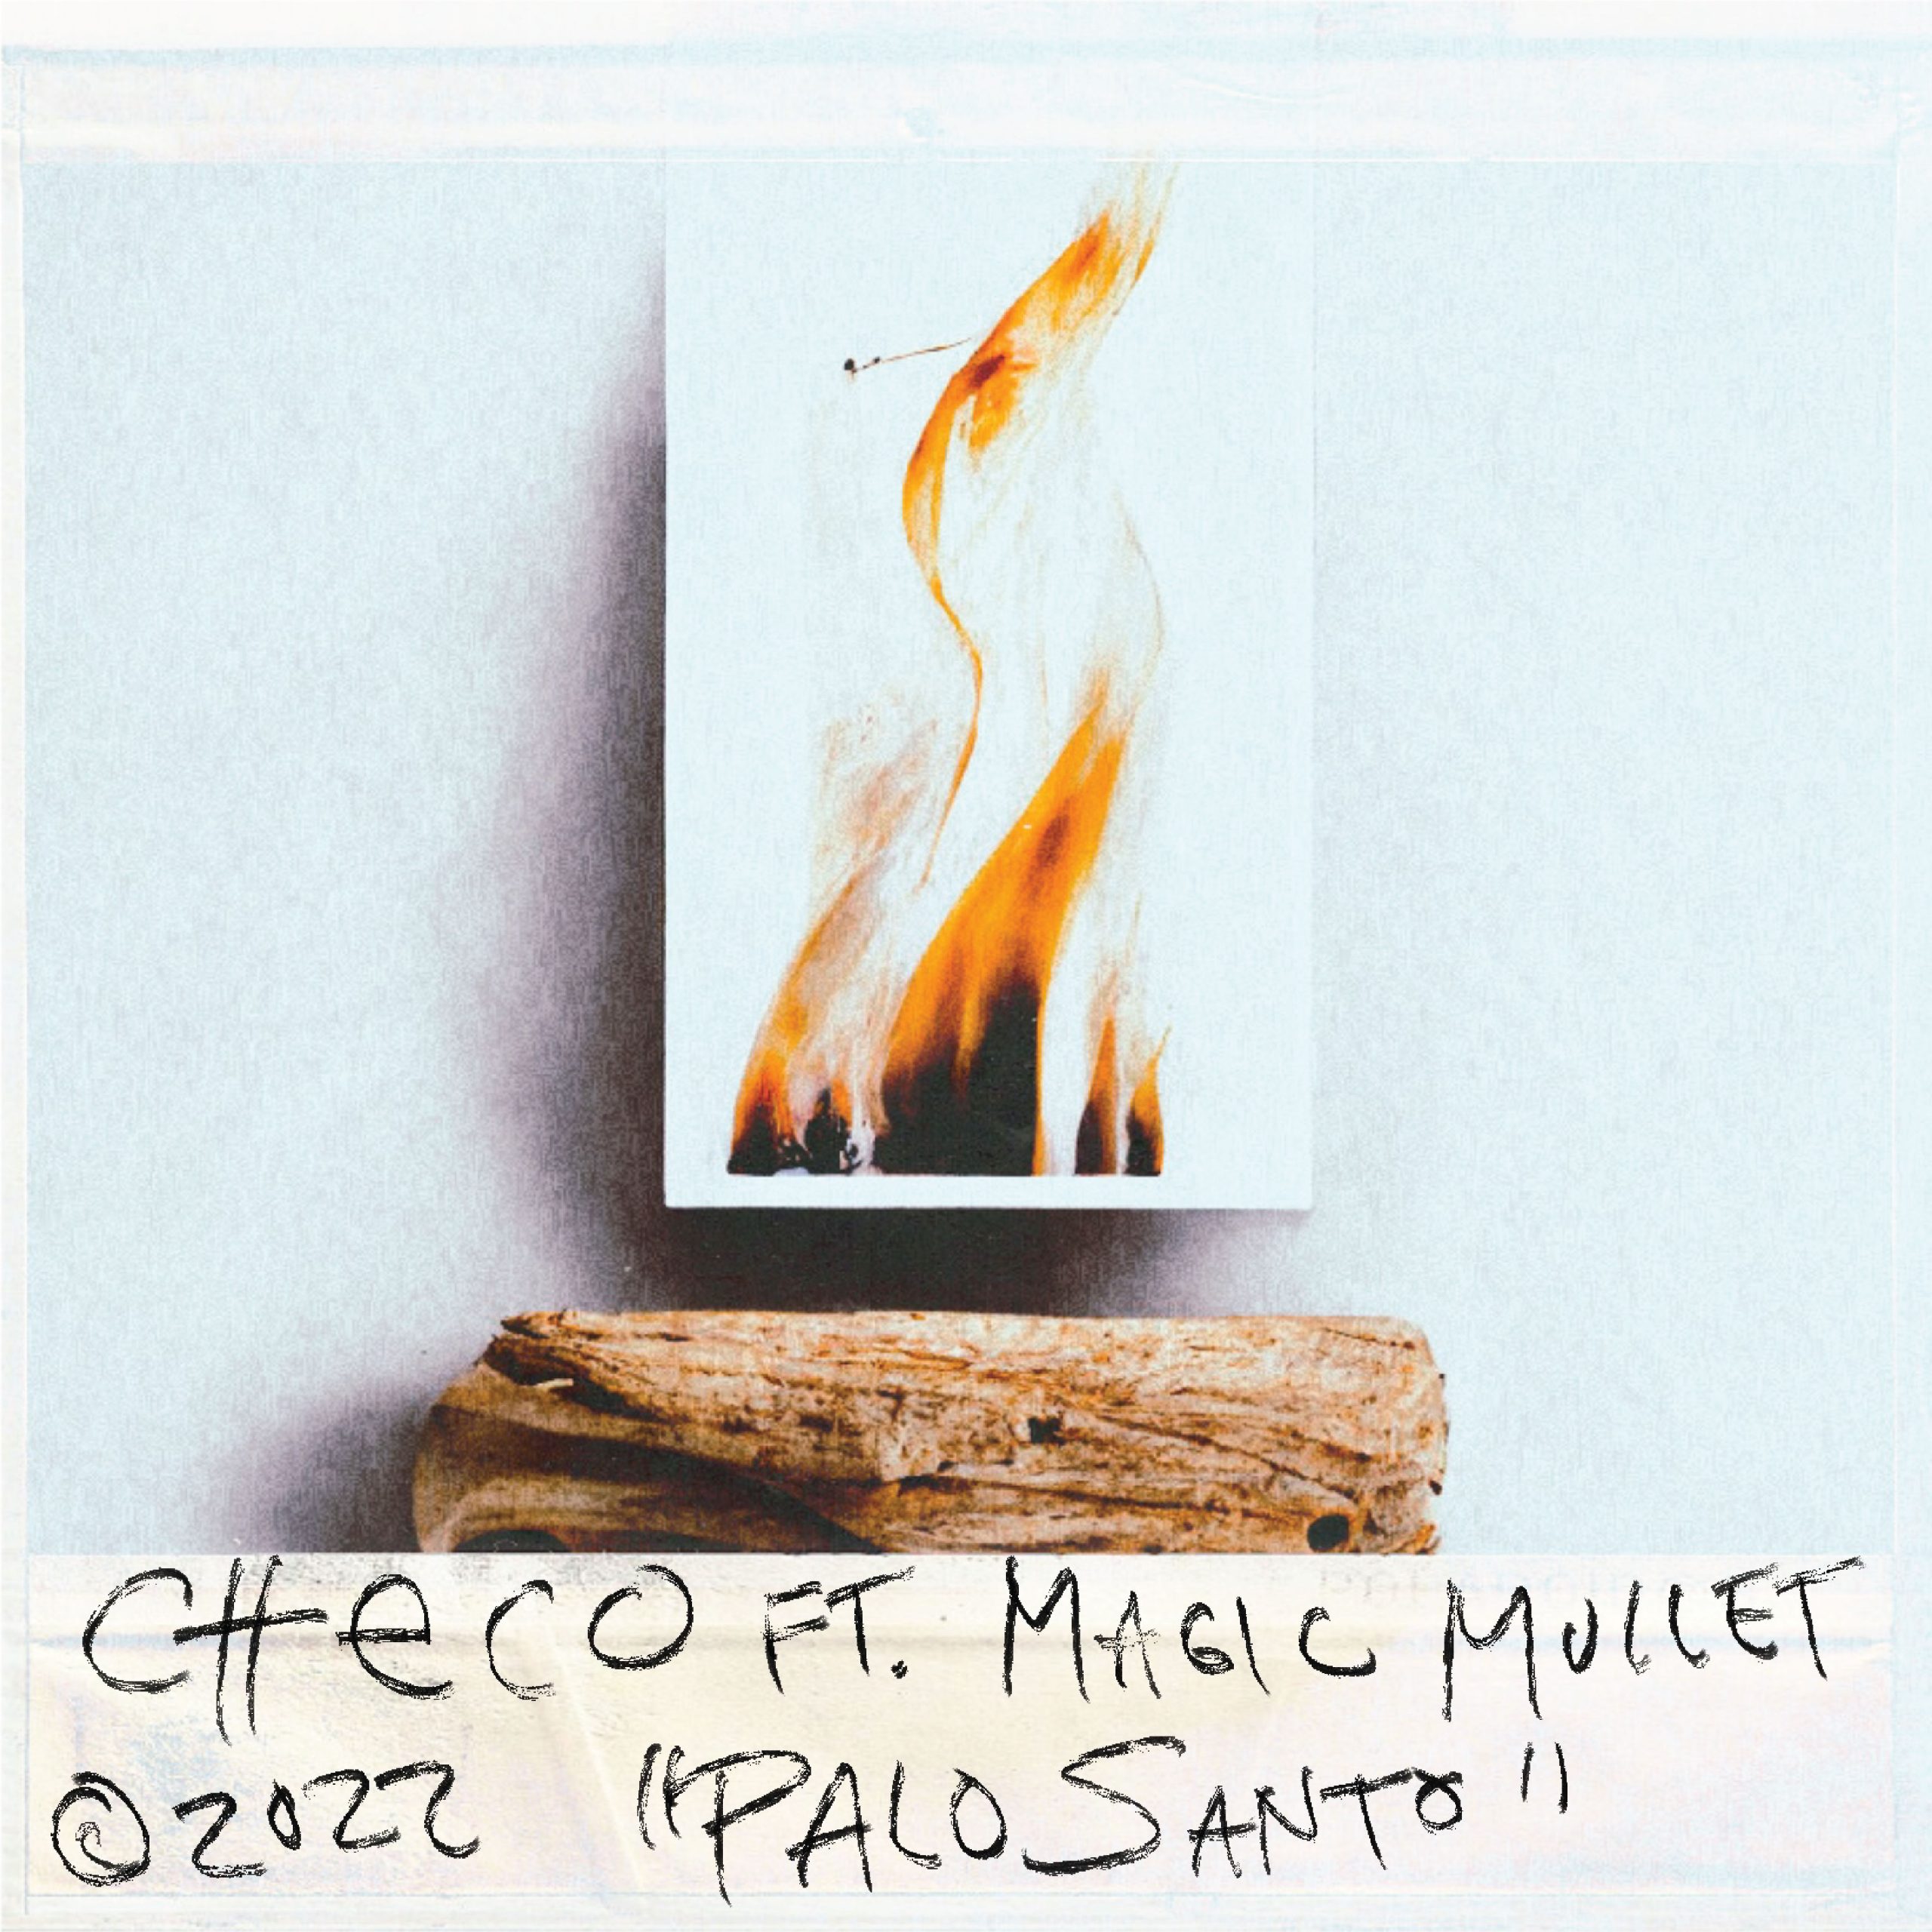 Checo & Magic Mullet Spread the Good Vibes with ‘Palo Santo’